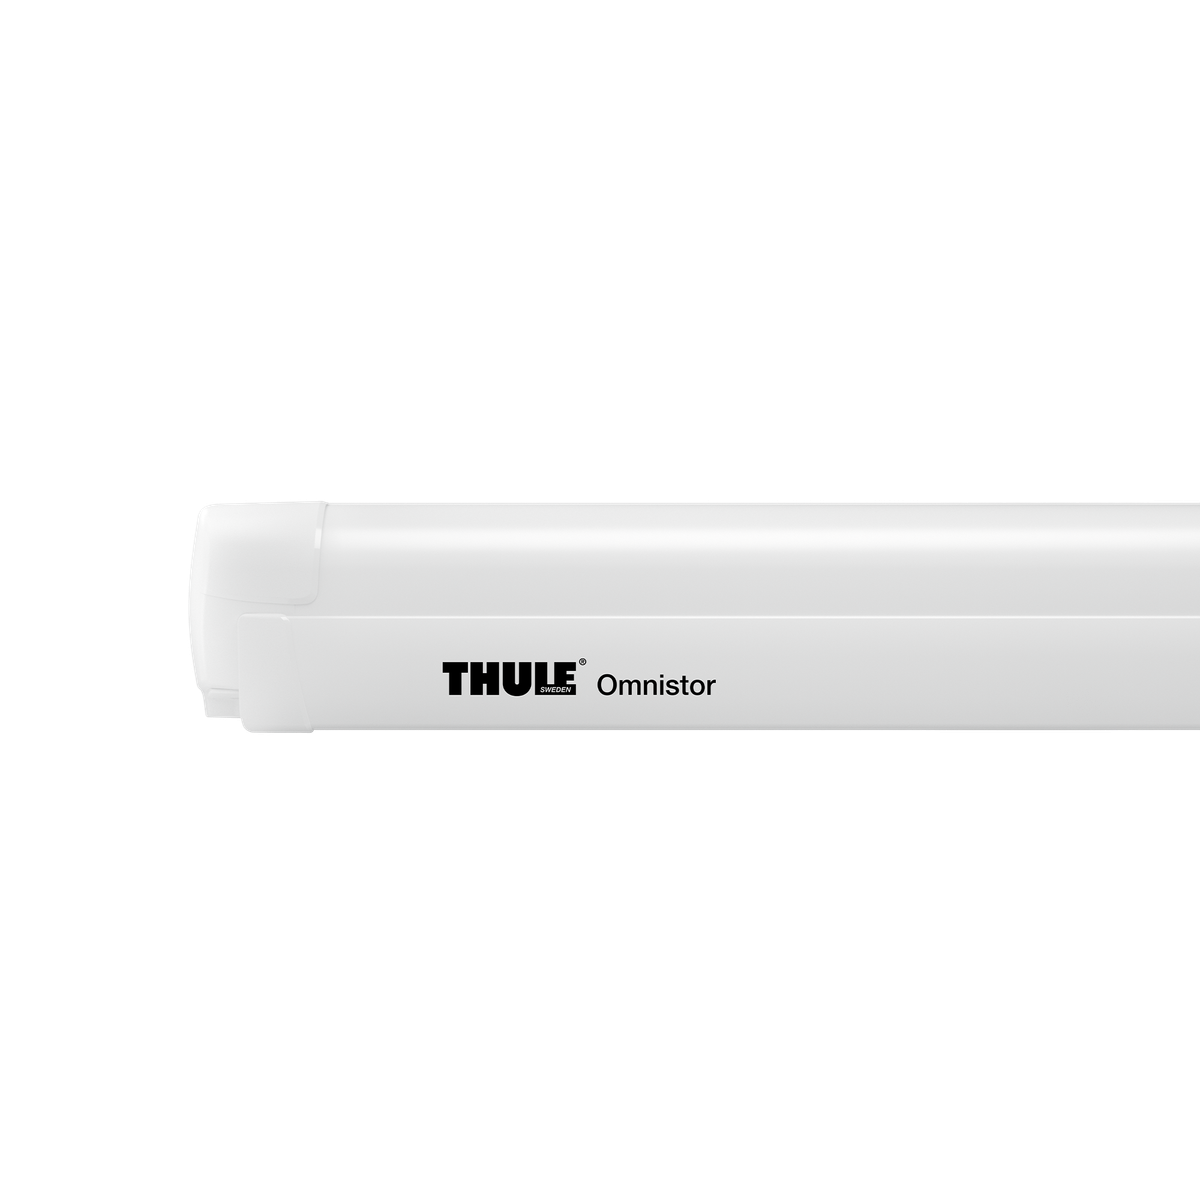 Thule Omnistor 8000 motorized wall awning 6.00x2.75m white